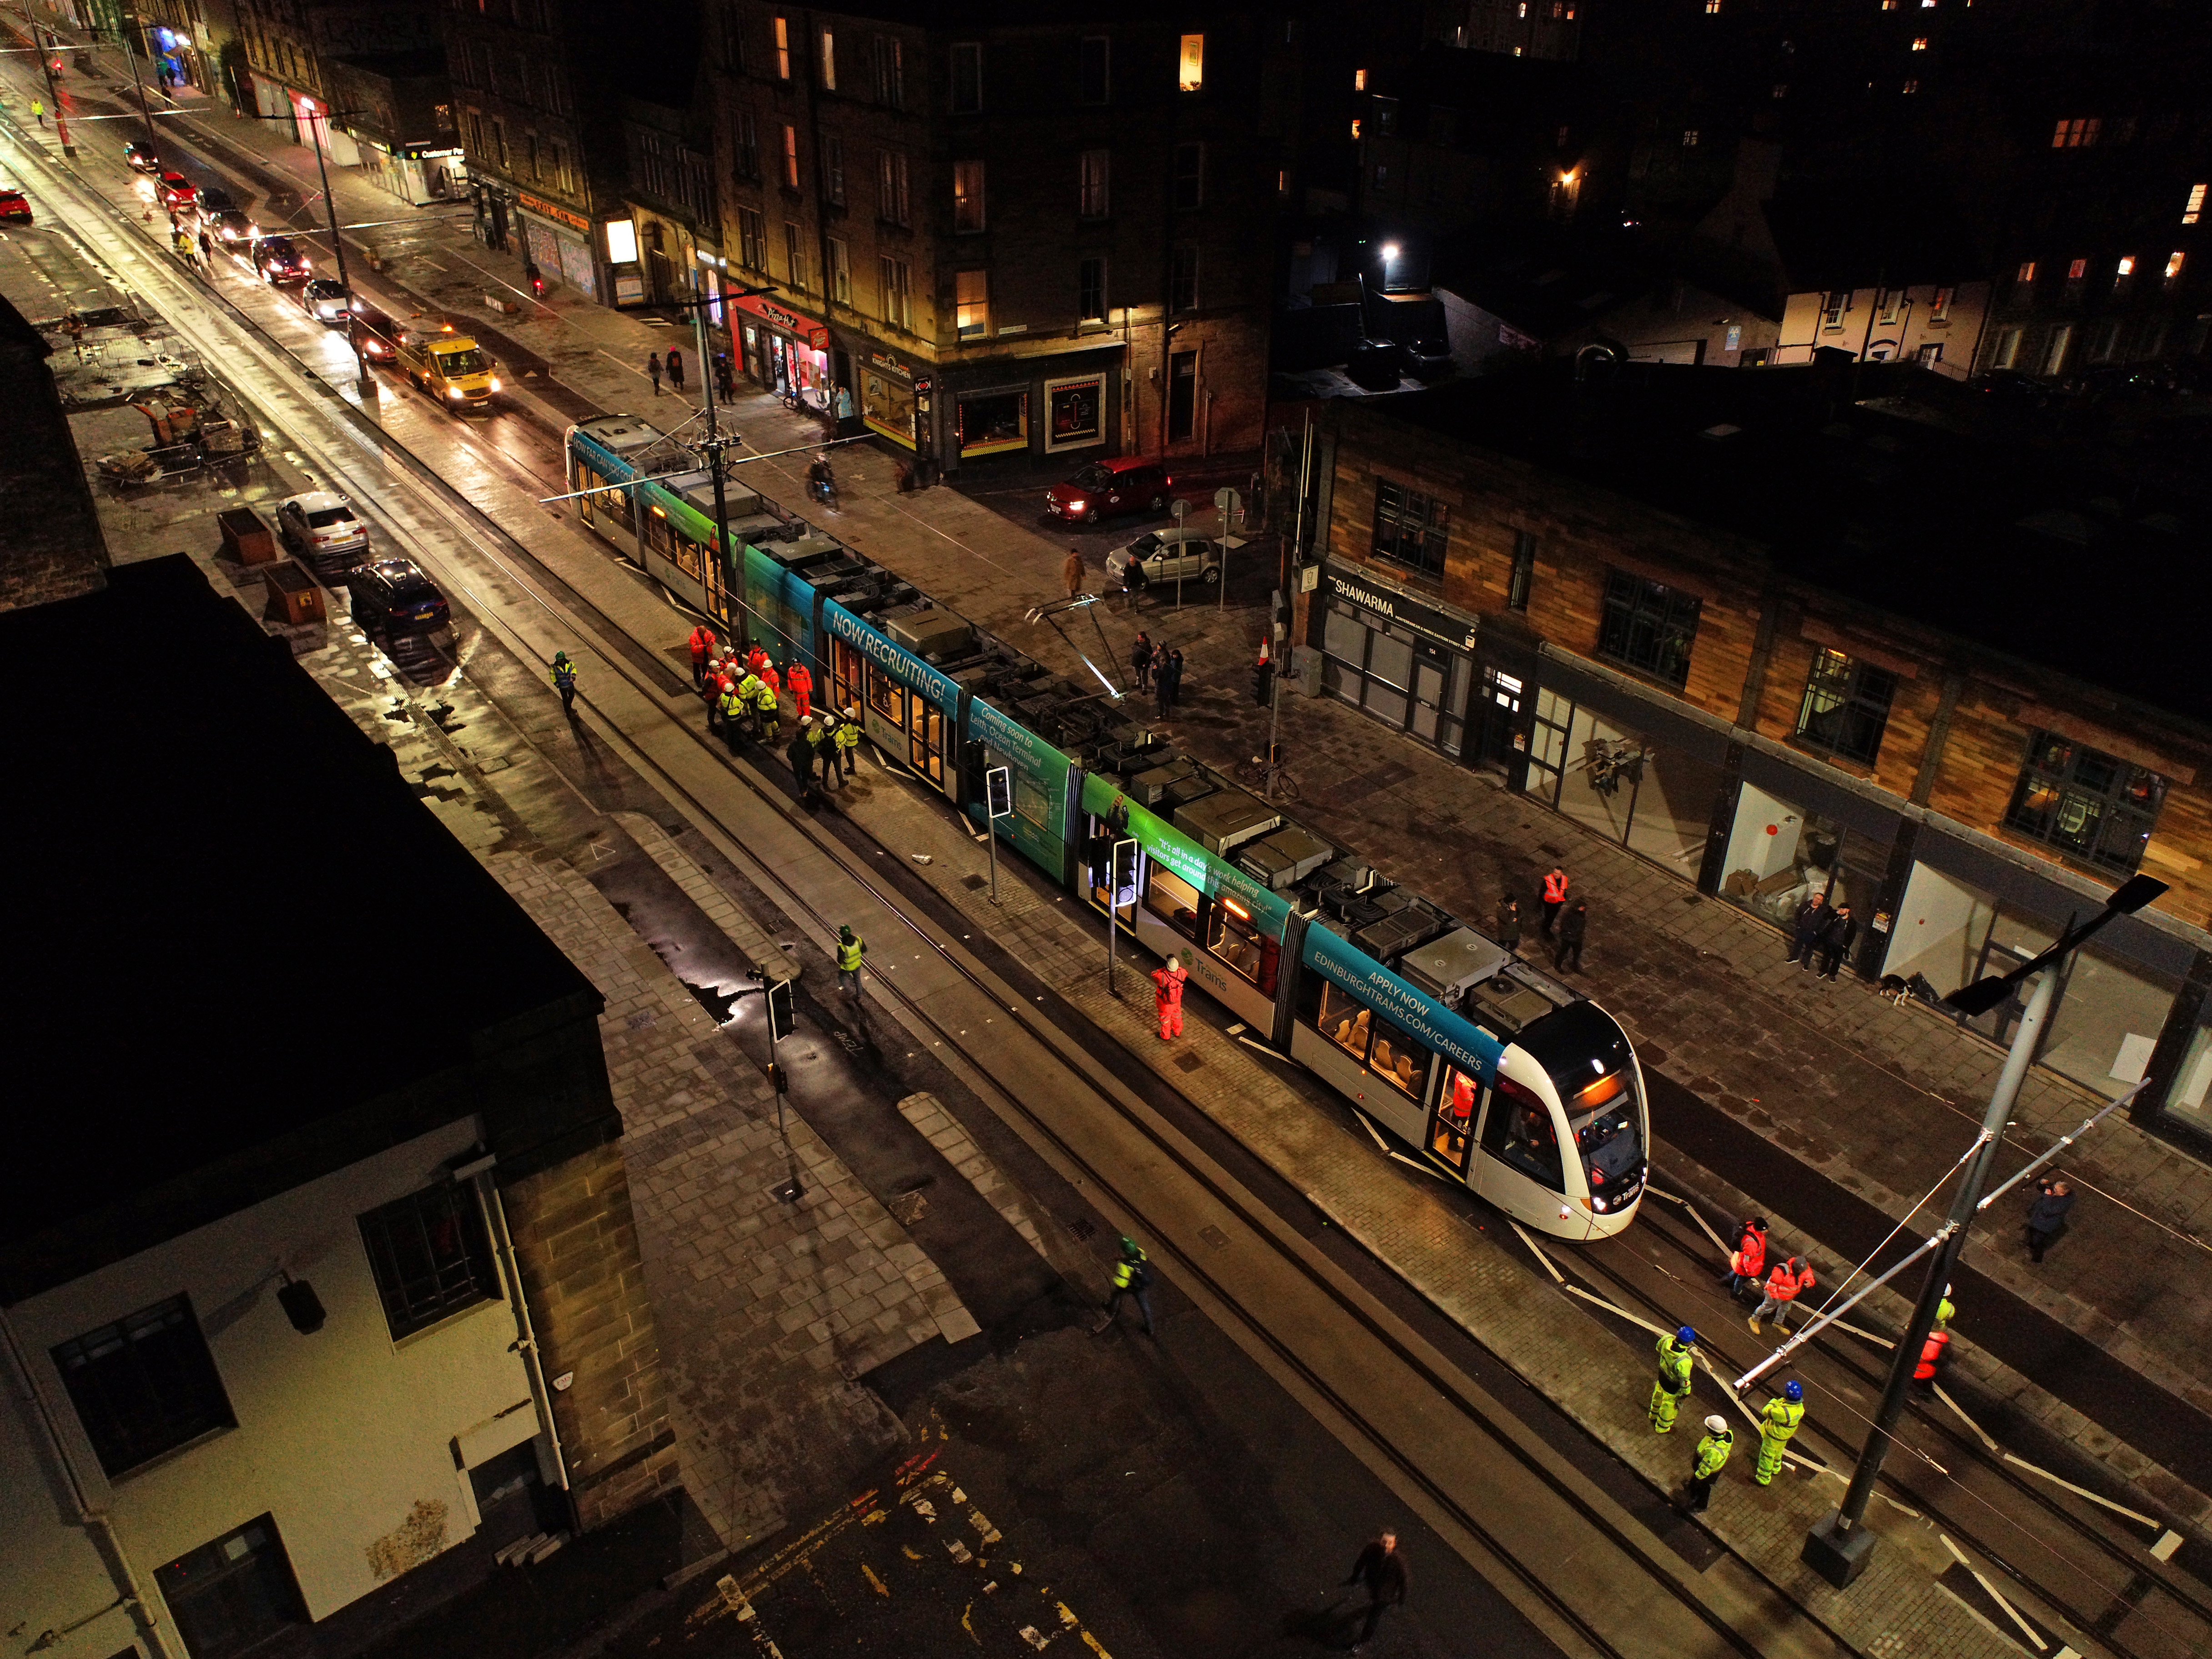 Trams on Leith Walk